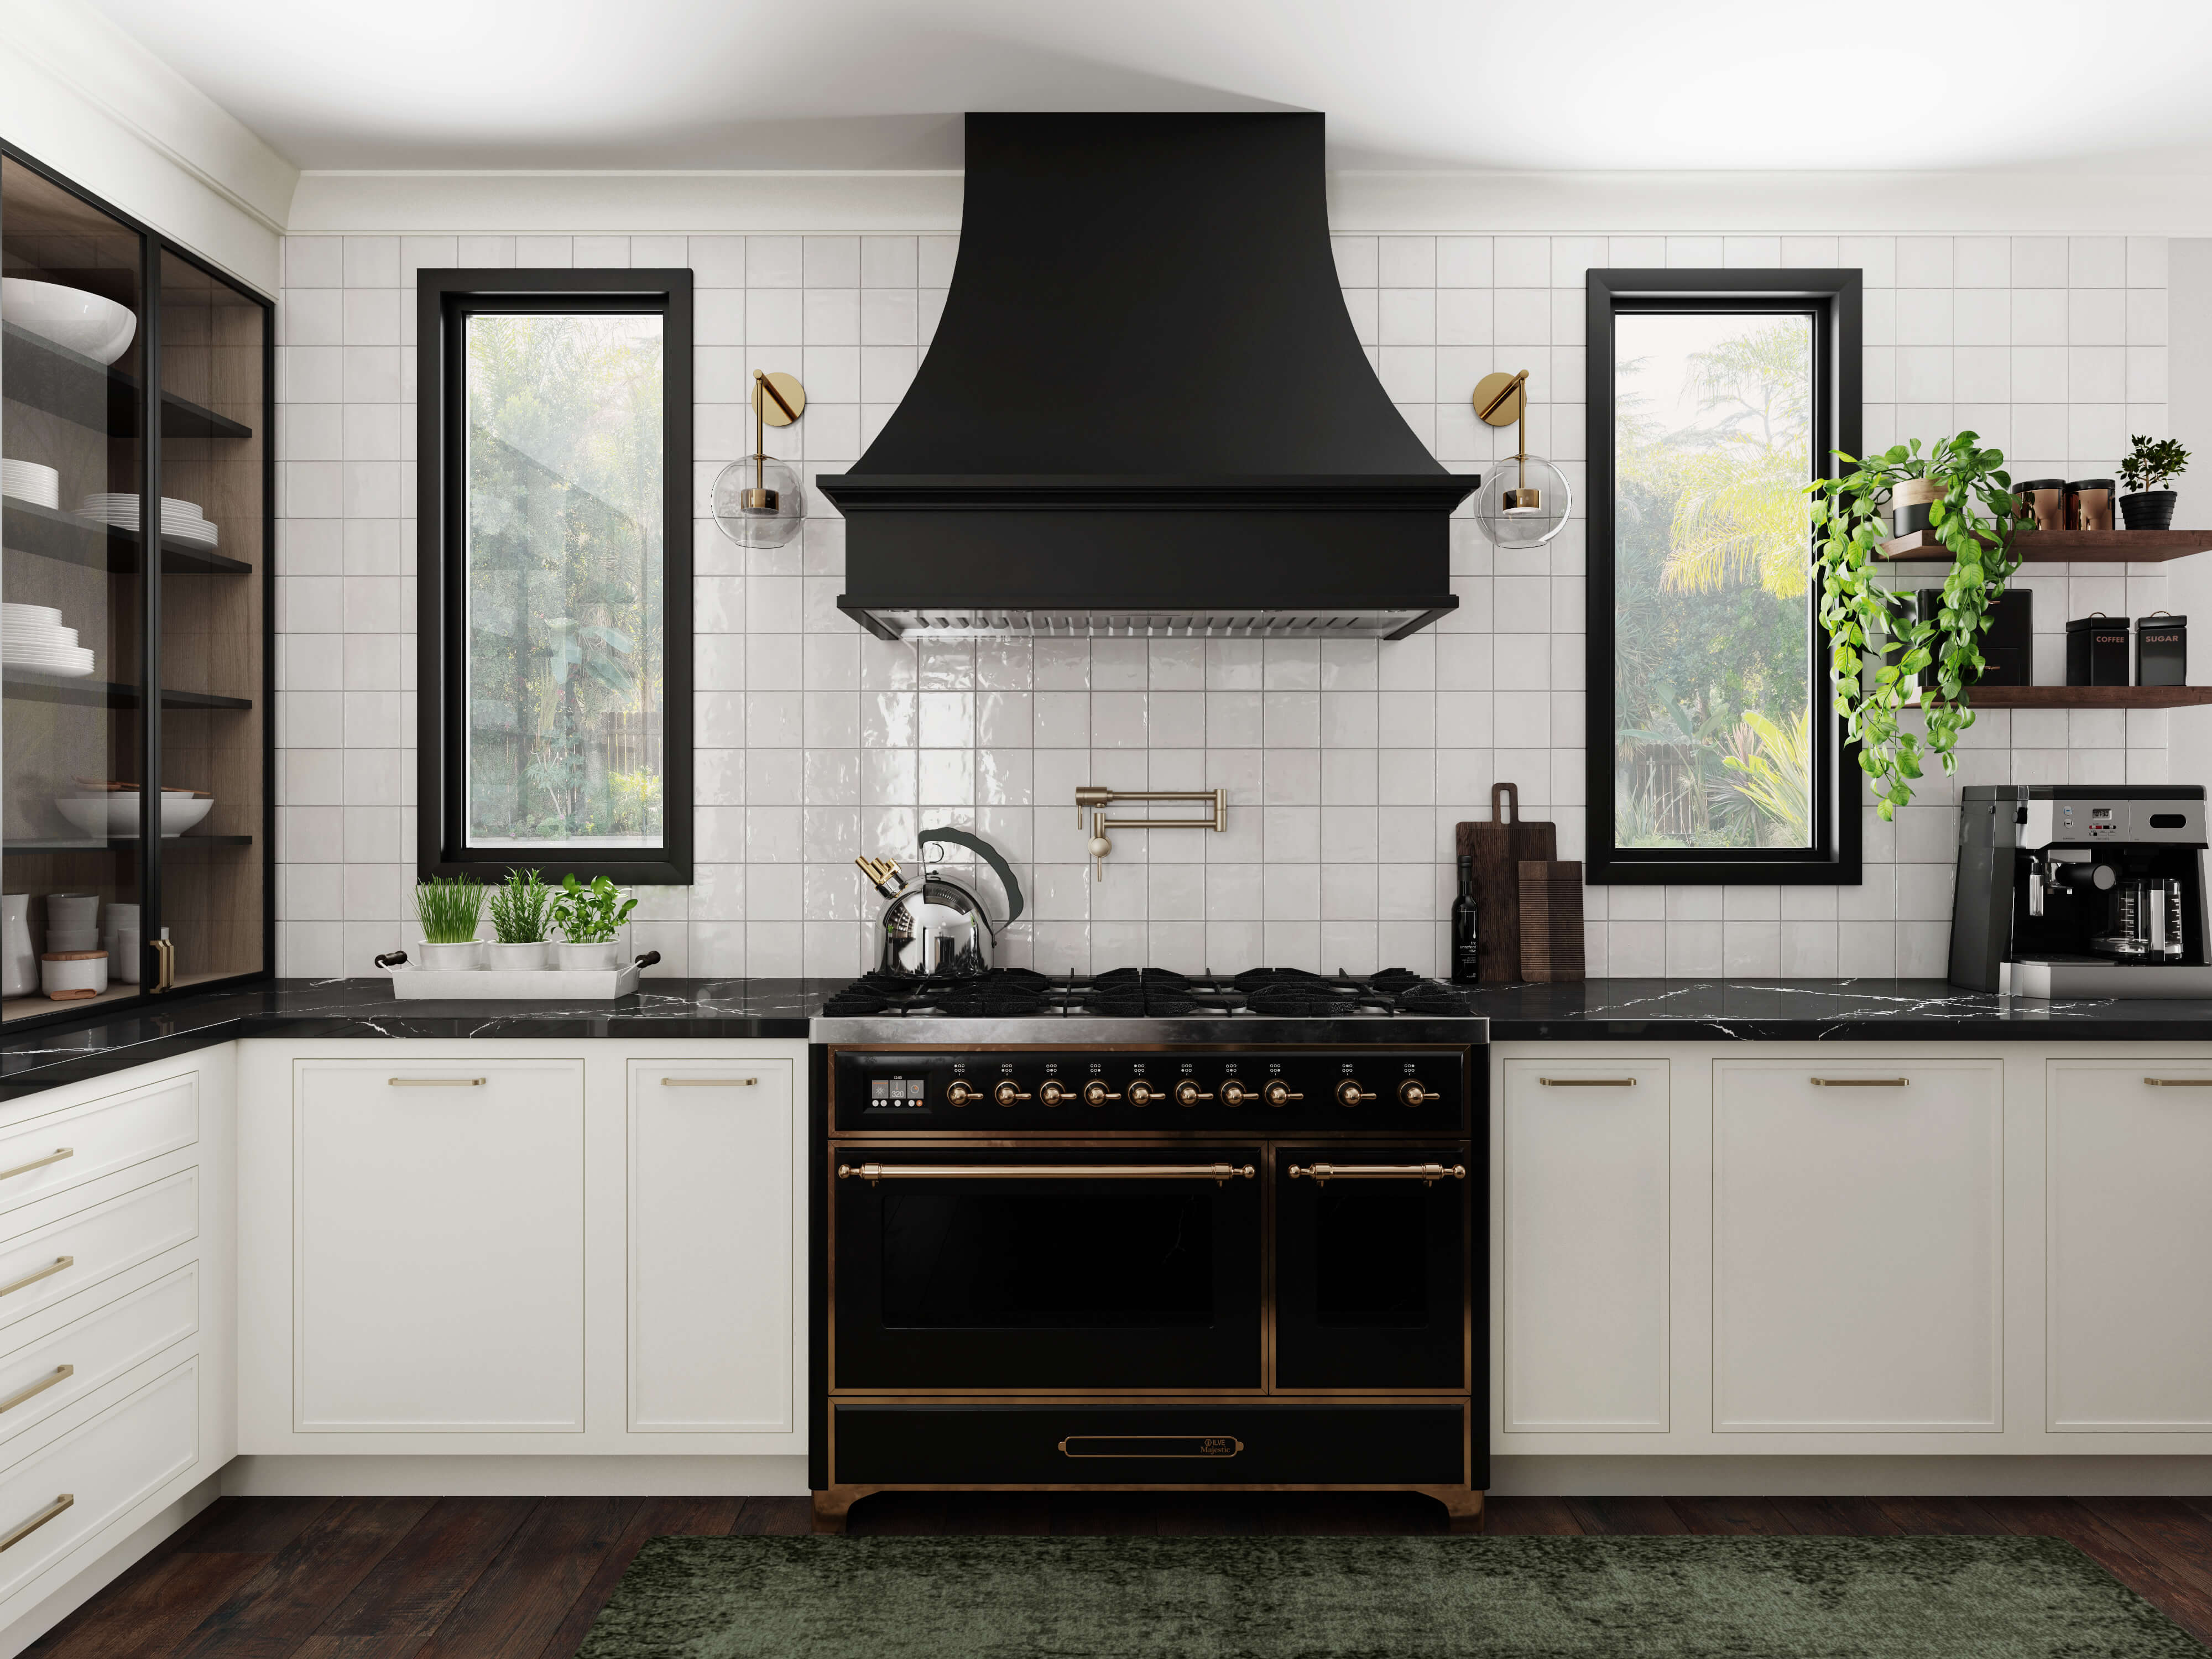 Modern curved wood hoods are a new product from Dura Supreme Cabinetry. This modern farmhouse kitchen features a black painted curved hood with a modern style.